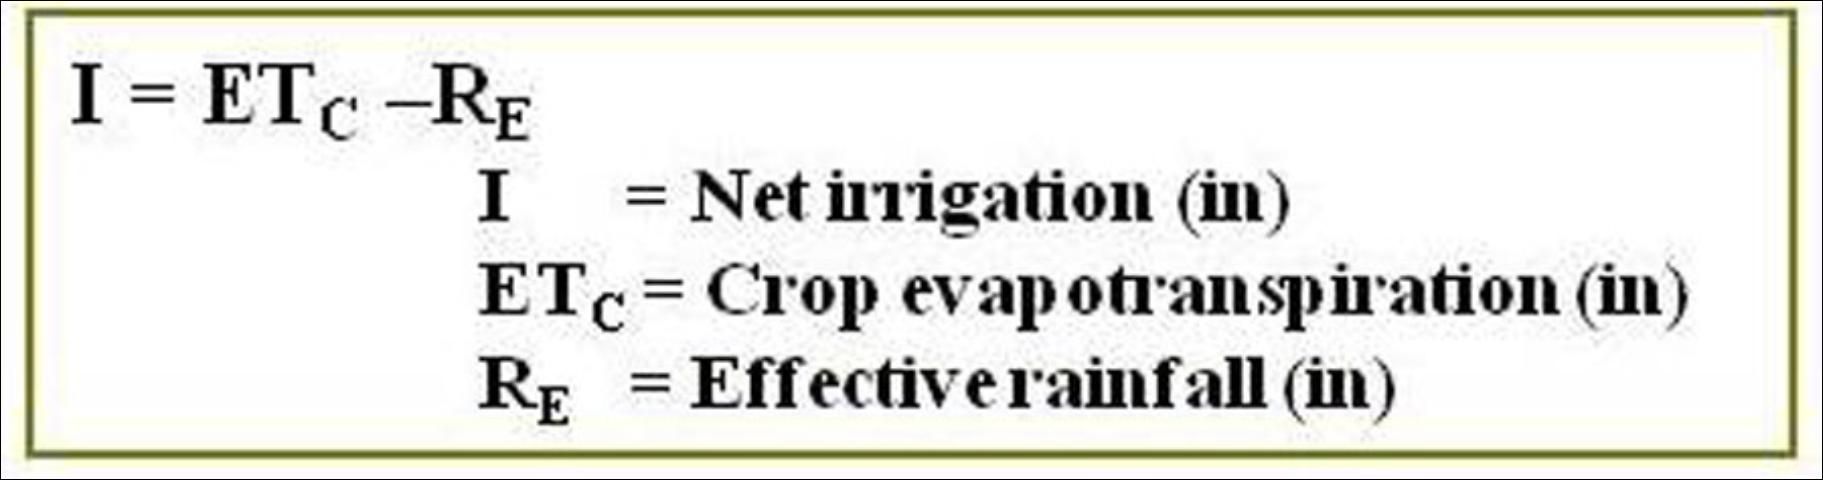 Equation 2. This formula is a simplified version of Equation 1 used to calculate net irrigation depth required by assuming negligible drainage, runoff, and change in storage.